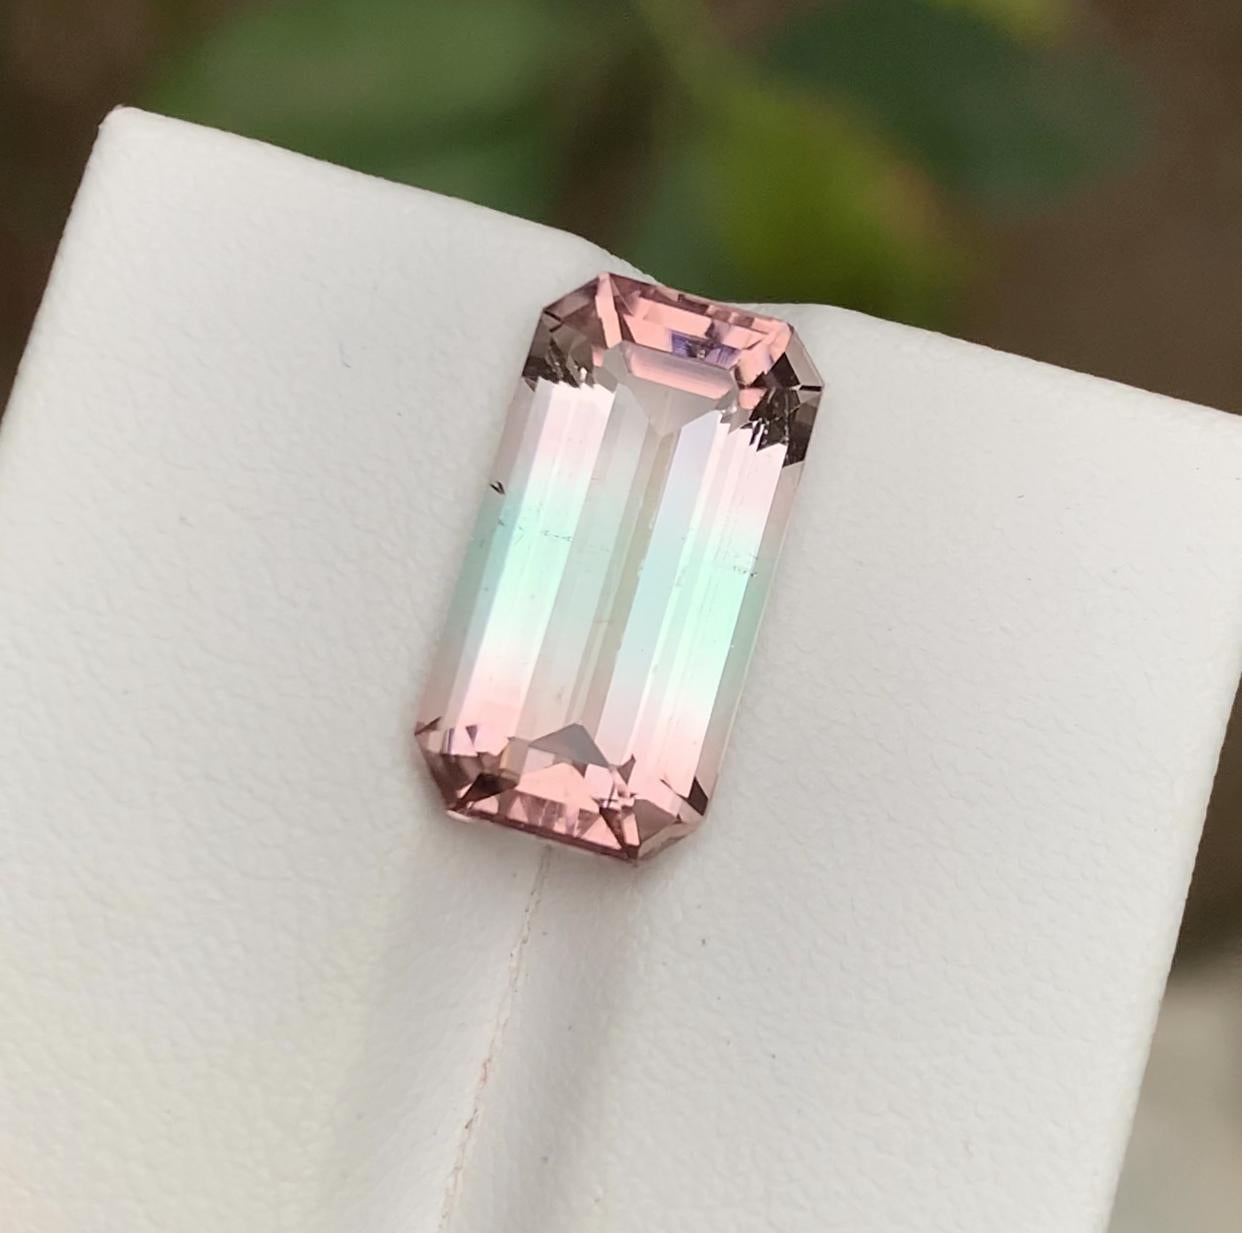 GEMSTONE TYPE: Tourmaline
PIECE(S): 1
WEIGHT: 7.00 Carat
SHAPE: Step Emerald Cut
SIZE (MM): 16.06 x 8.46 x 6.12
COLOR: Bicolor
CLARITY: 95% Eye Clean
TREATMENT: None
ORIGIN: Afghanistan
CERTIFICATE: On demand

This exceptional 7 carat bicolor